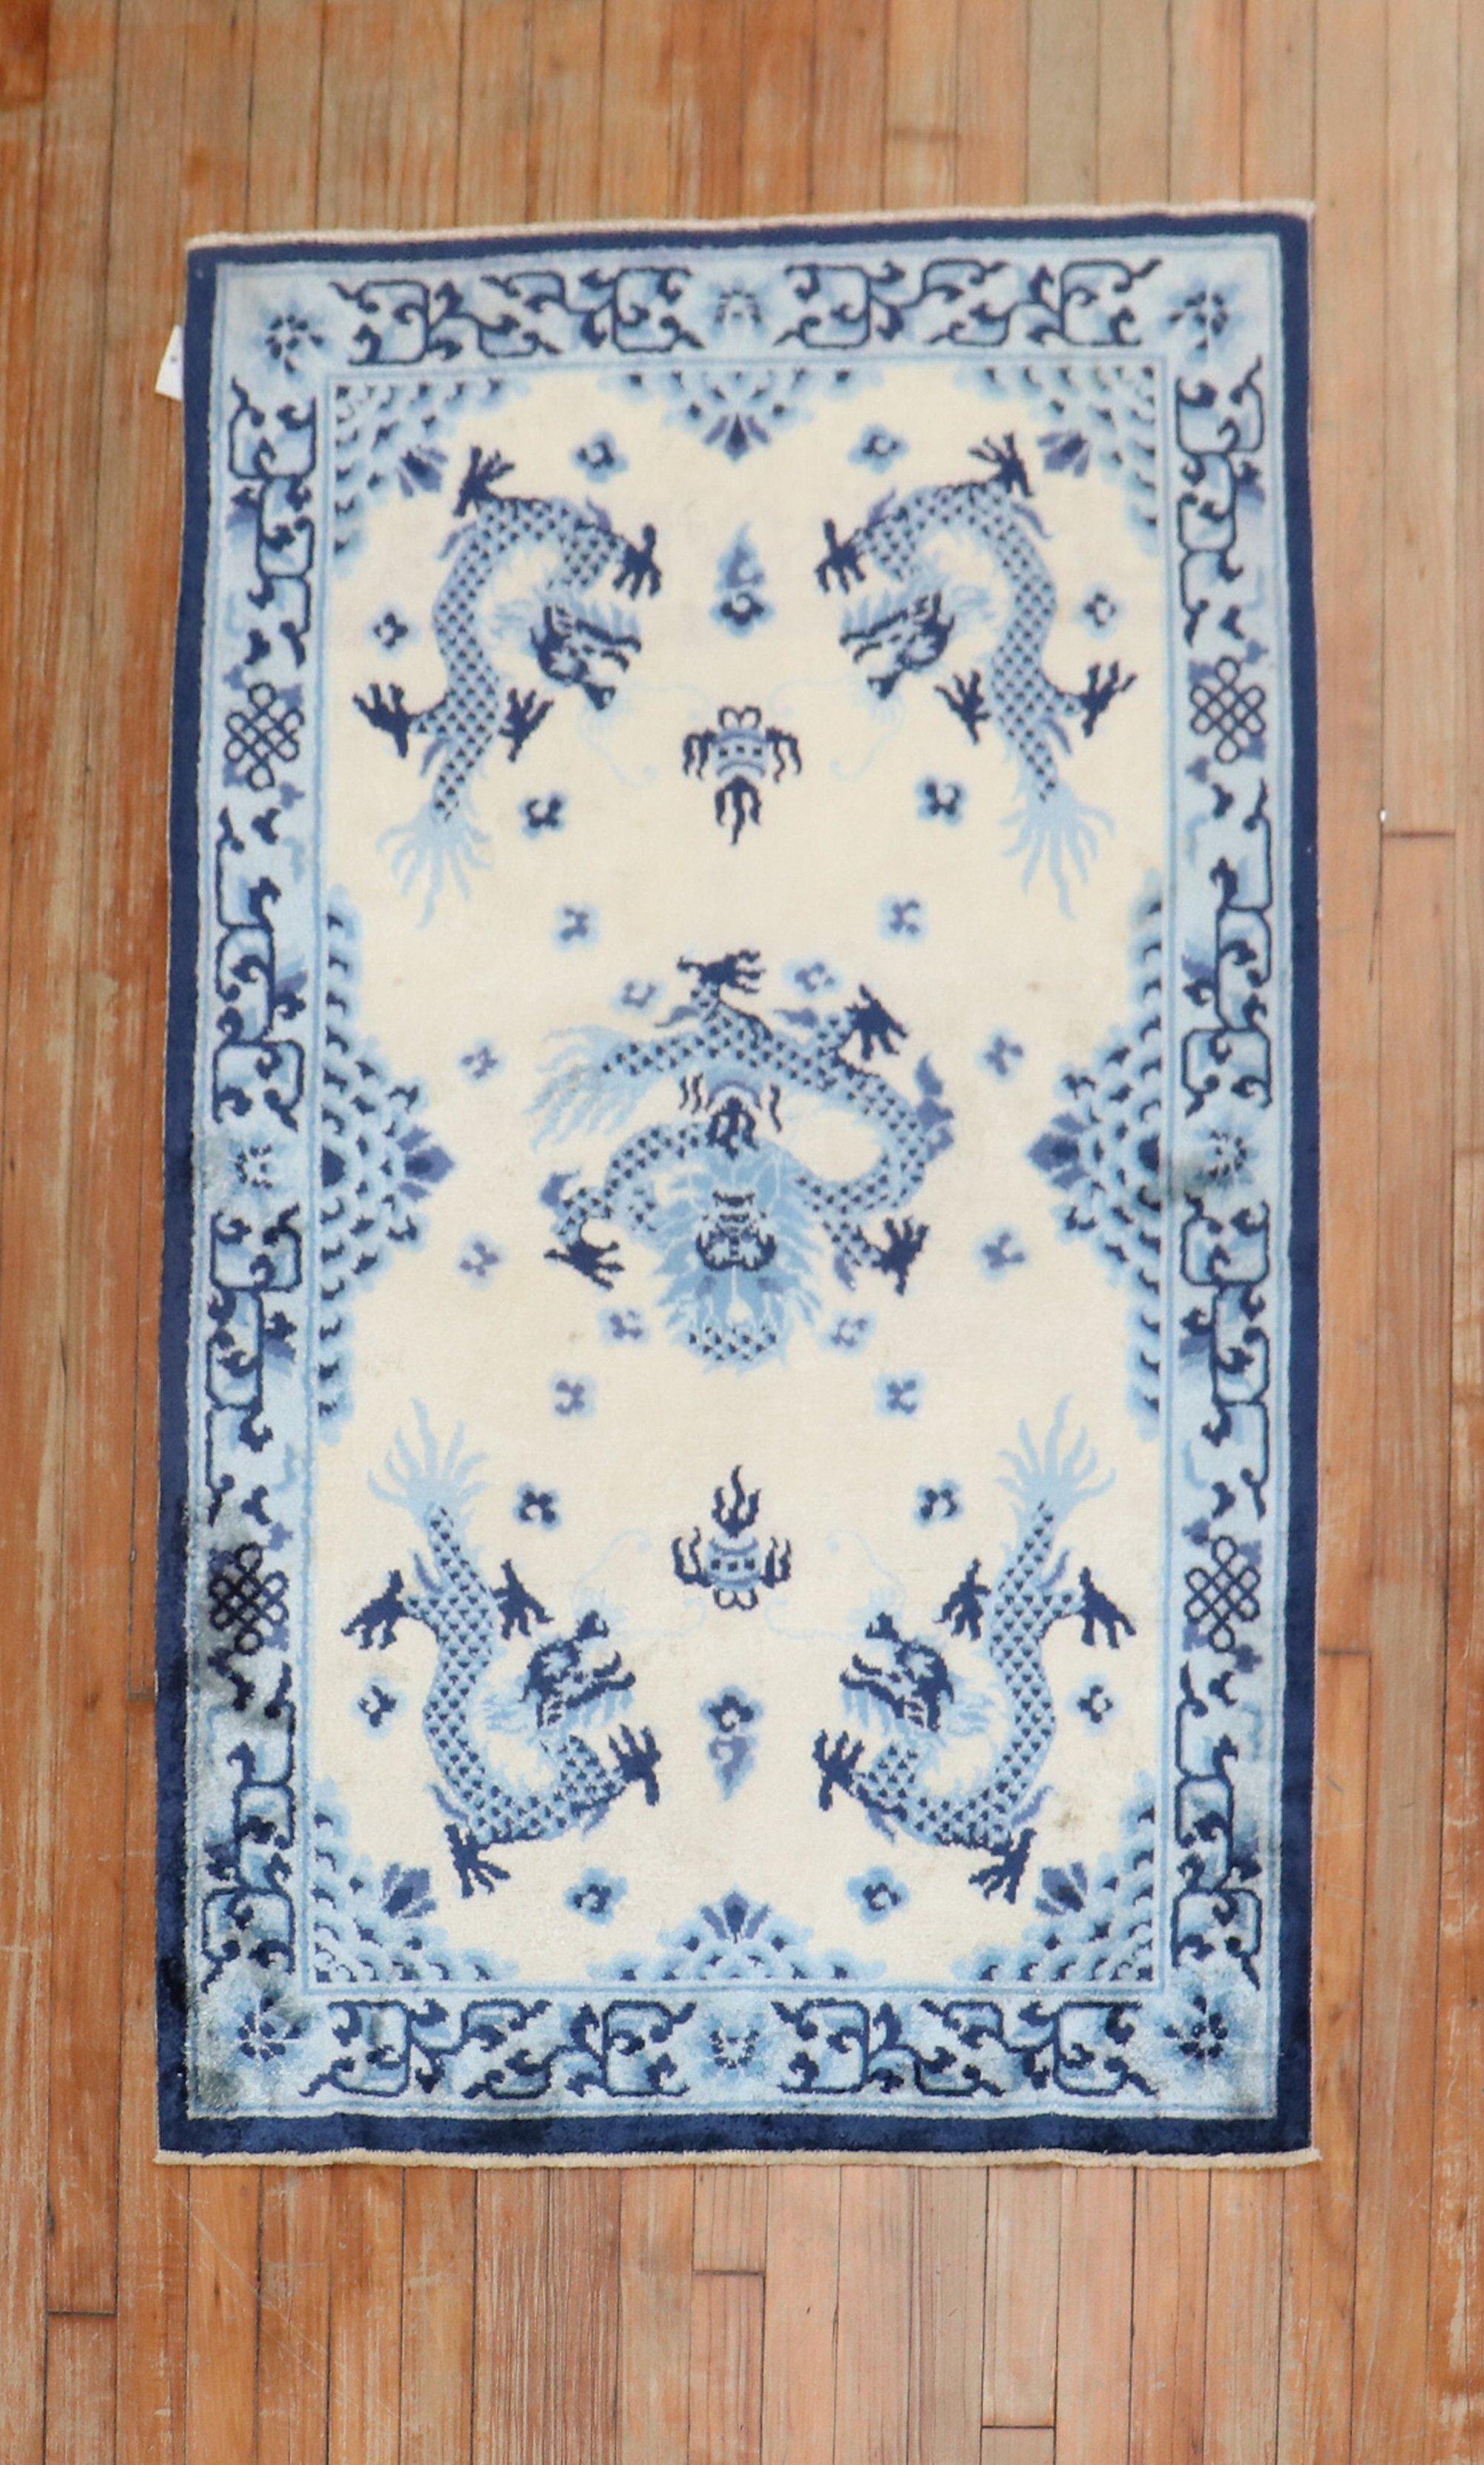 A late 20th-century Chinese Silk rug in beige, light blue and navy

Measures: 3' x 4'11''.